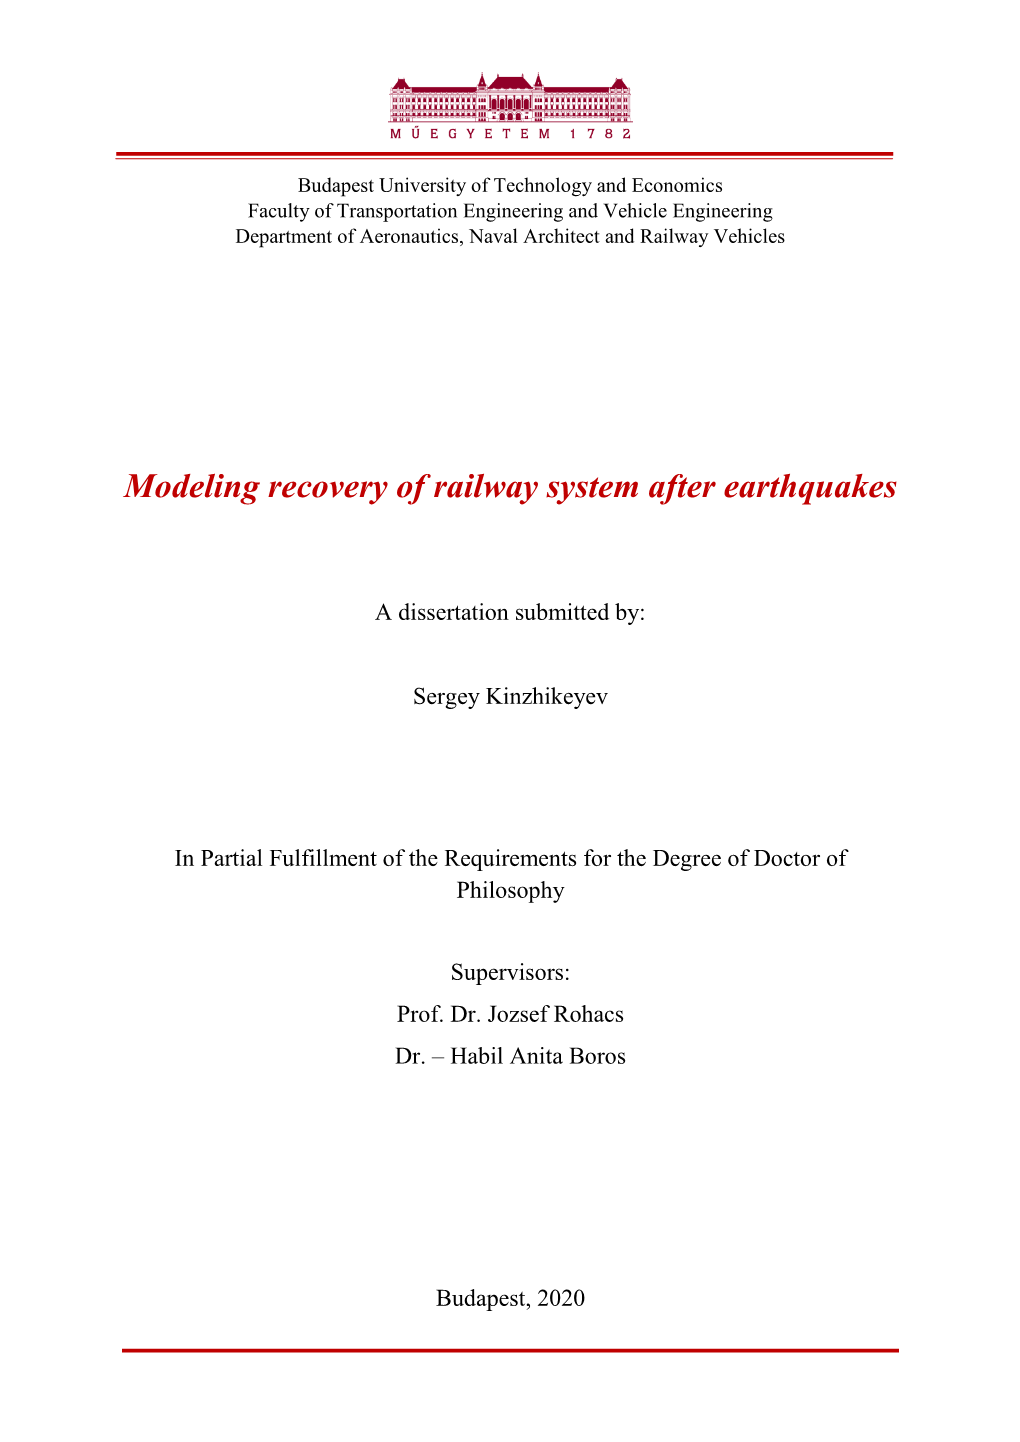 Modeling Recovery of Railway System After Earthquakes